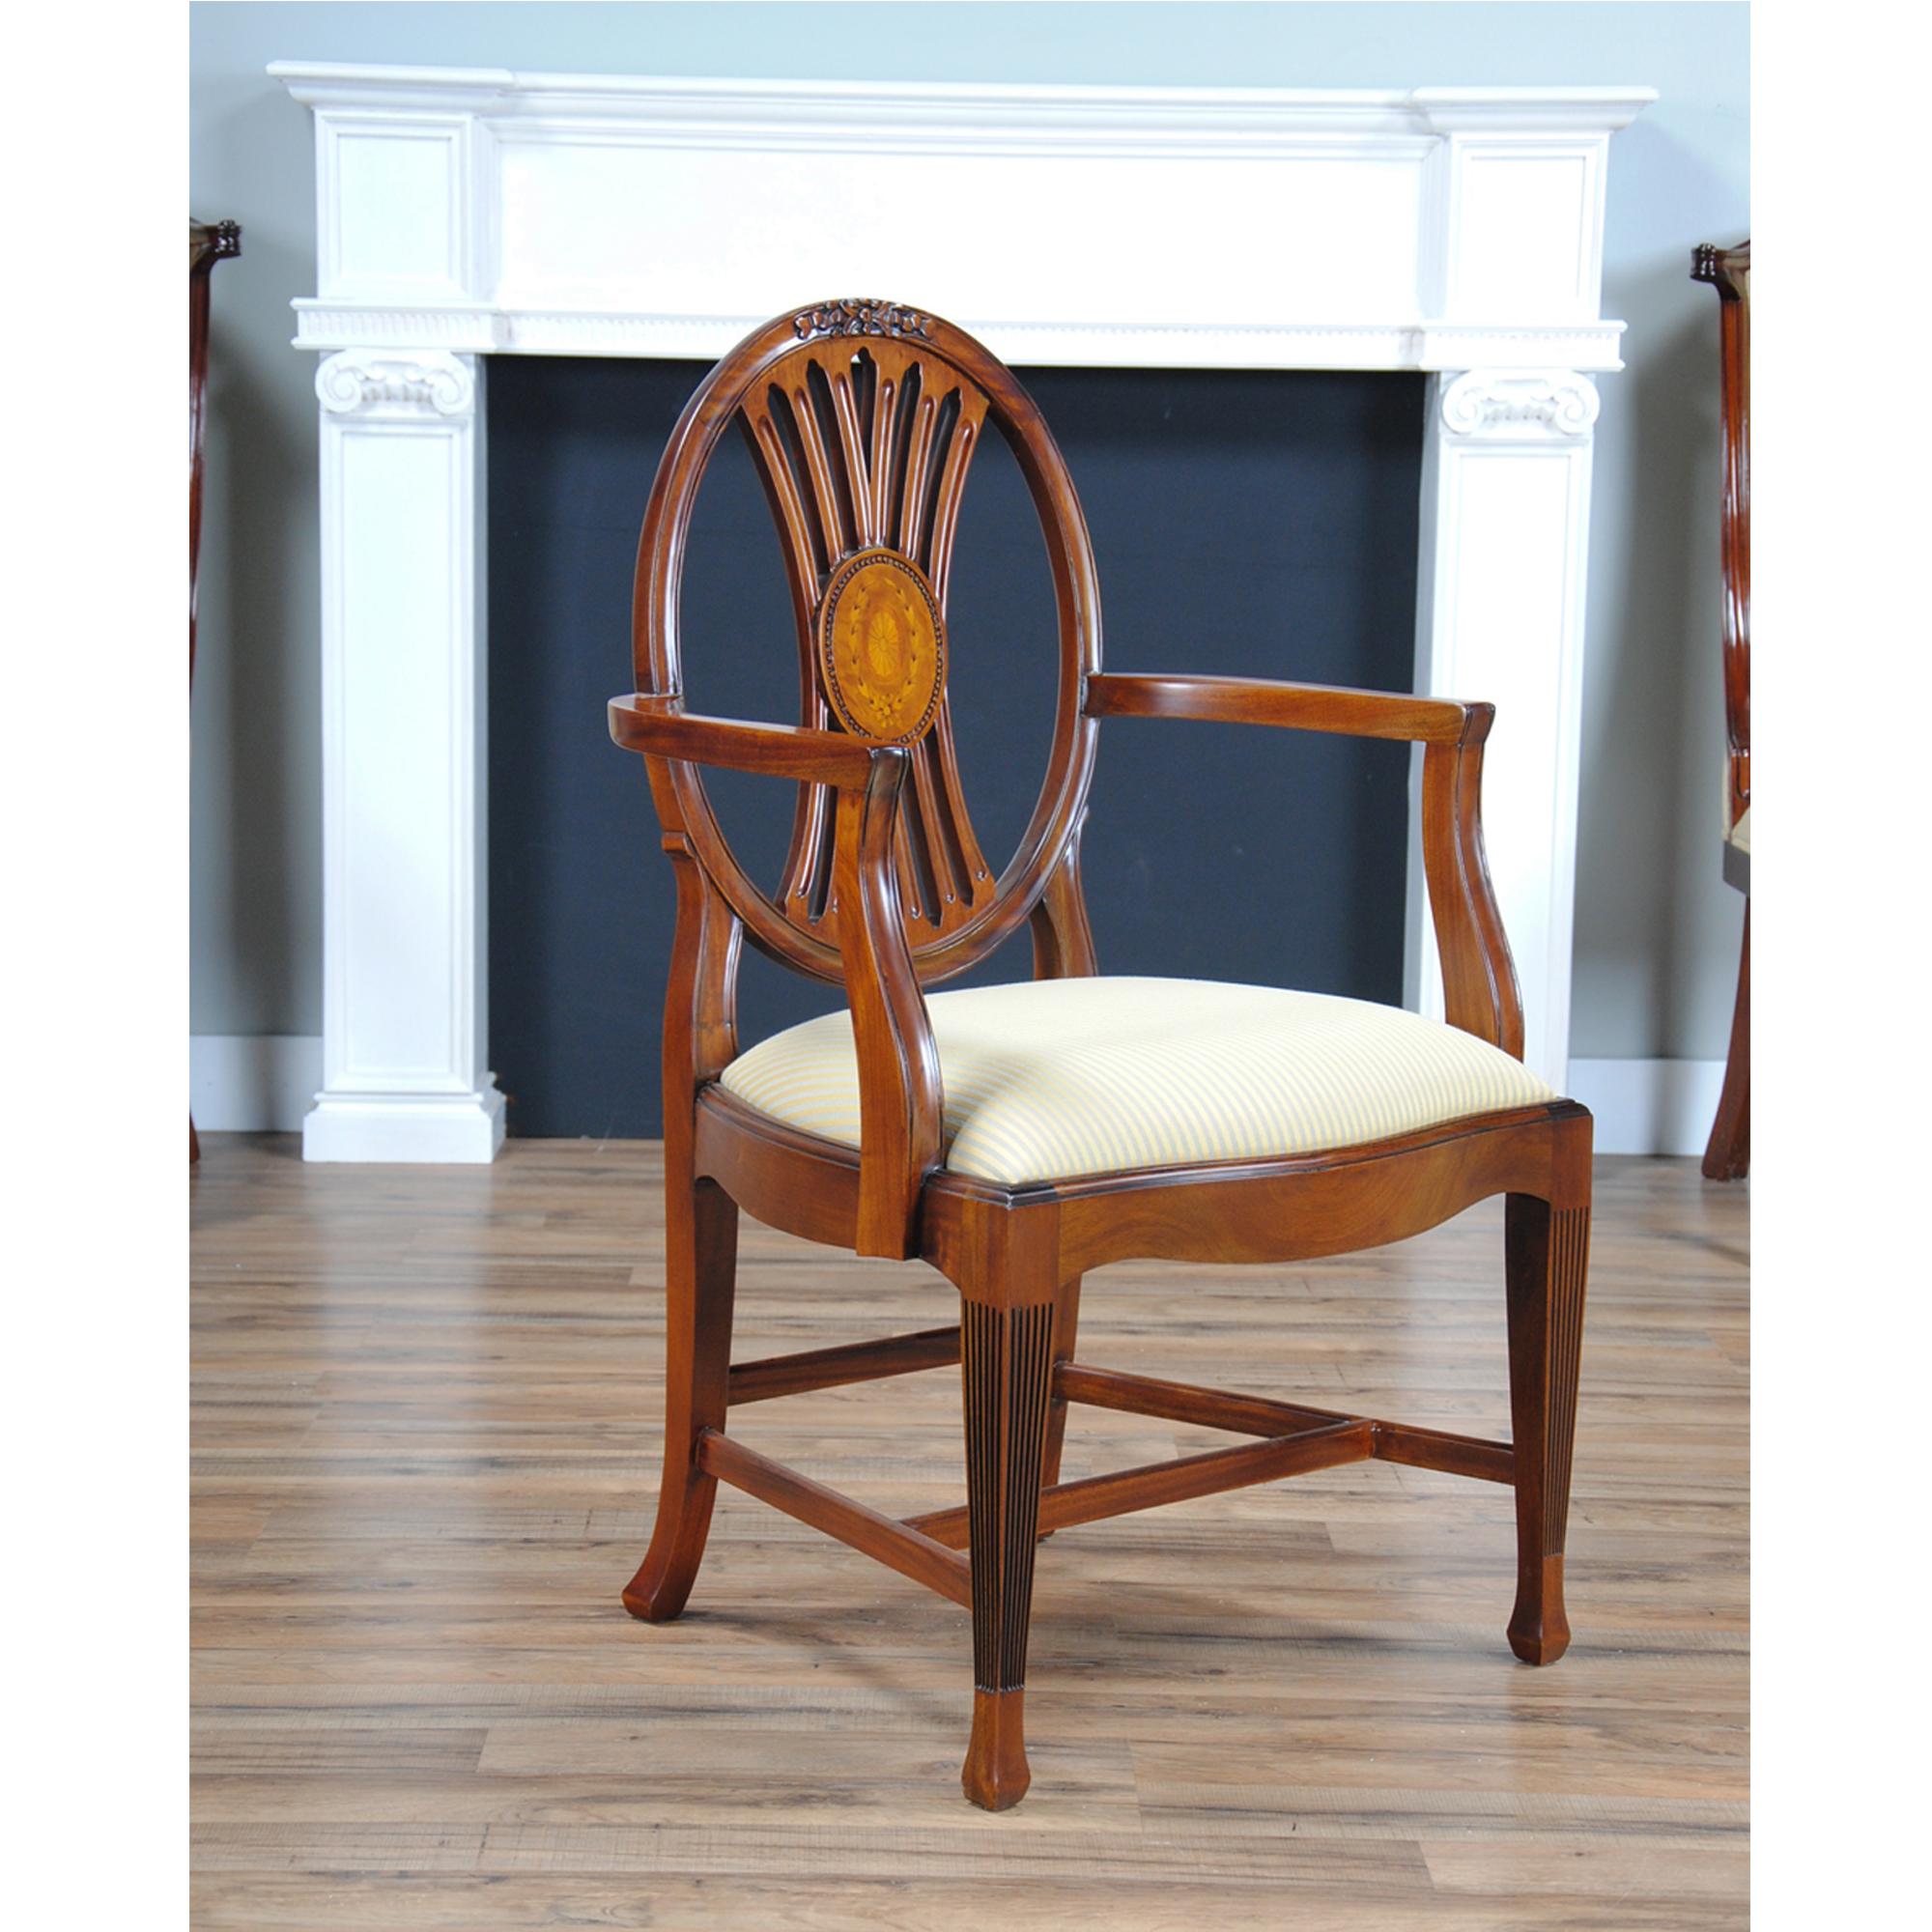 This set of 10 Round Back Inlaid Chairs consists of 2 arm chairs and 8 side chairs. Some of the great design features include high quality workmanship and materials, including beautifully shaped solid mahogany throughout and hand cut veneers in the